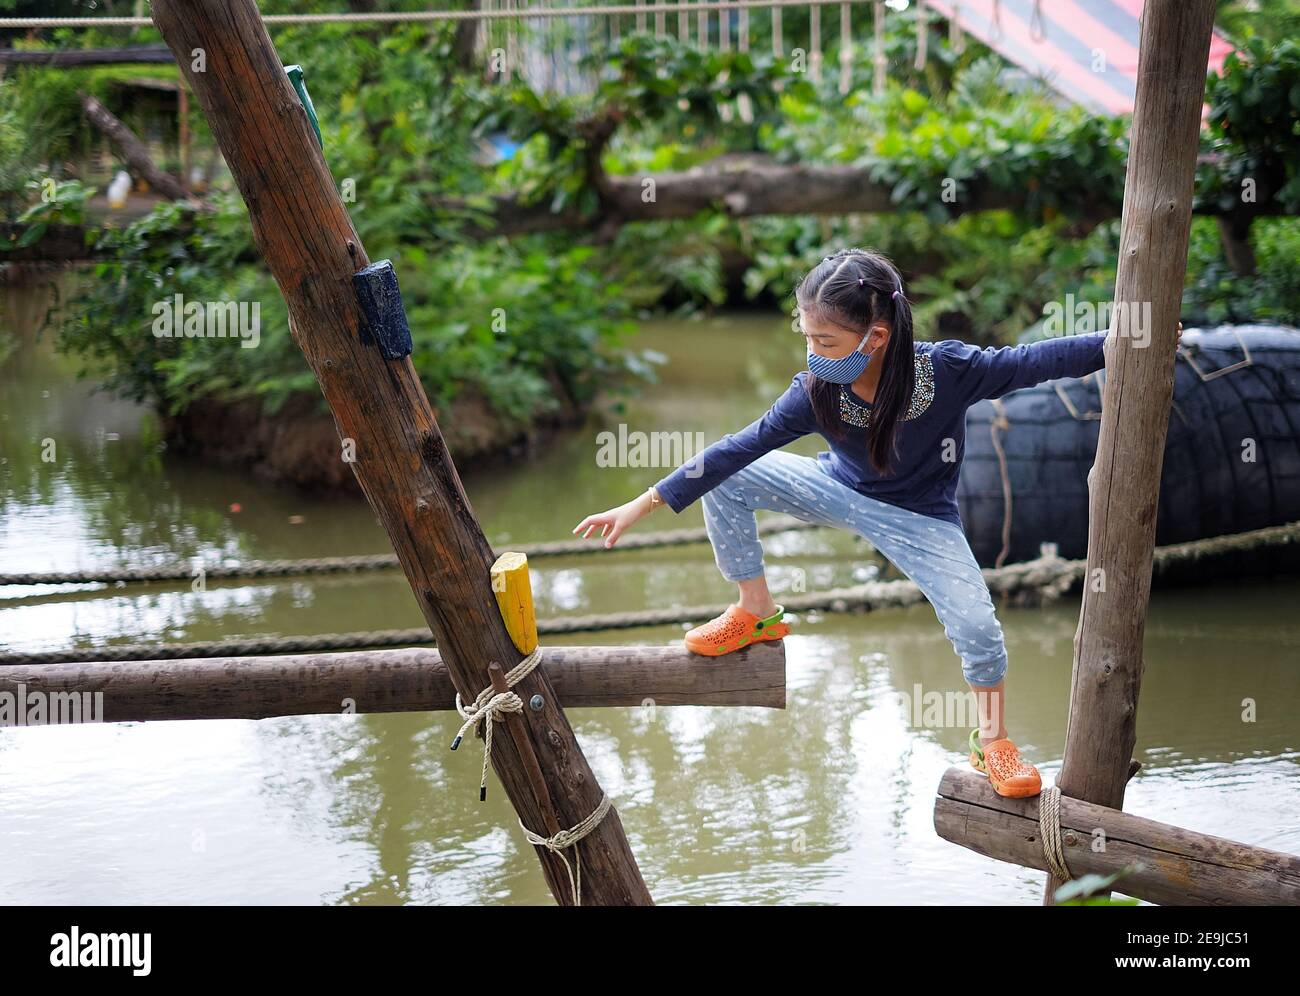 A cute young Asian girl trying to cross a small canal through a timber structure with opening gaps, being brave but cautious to reach her destination. Stock Photo